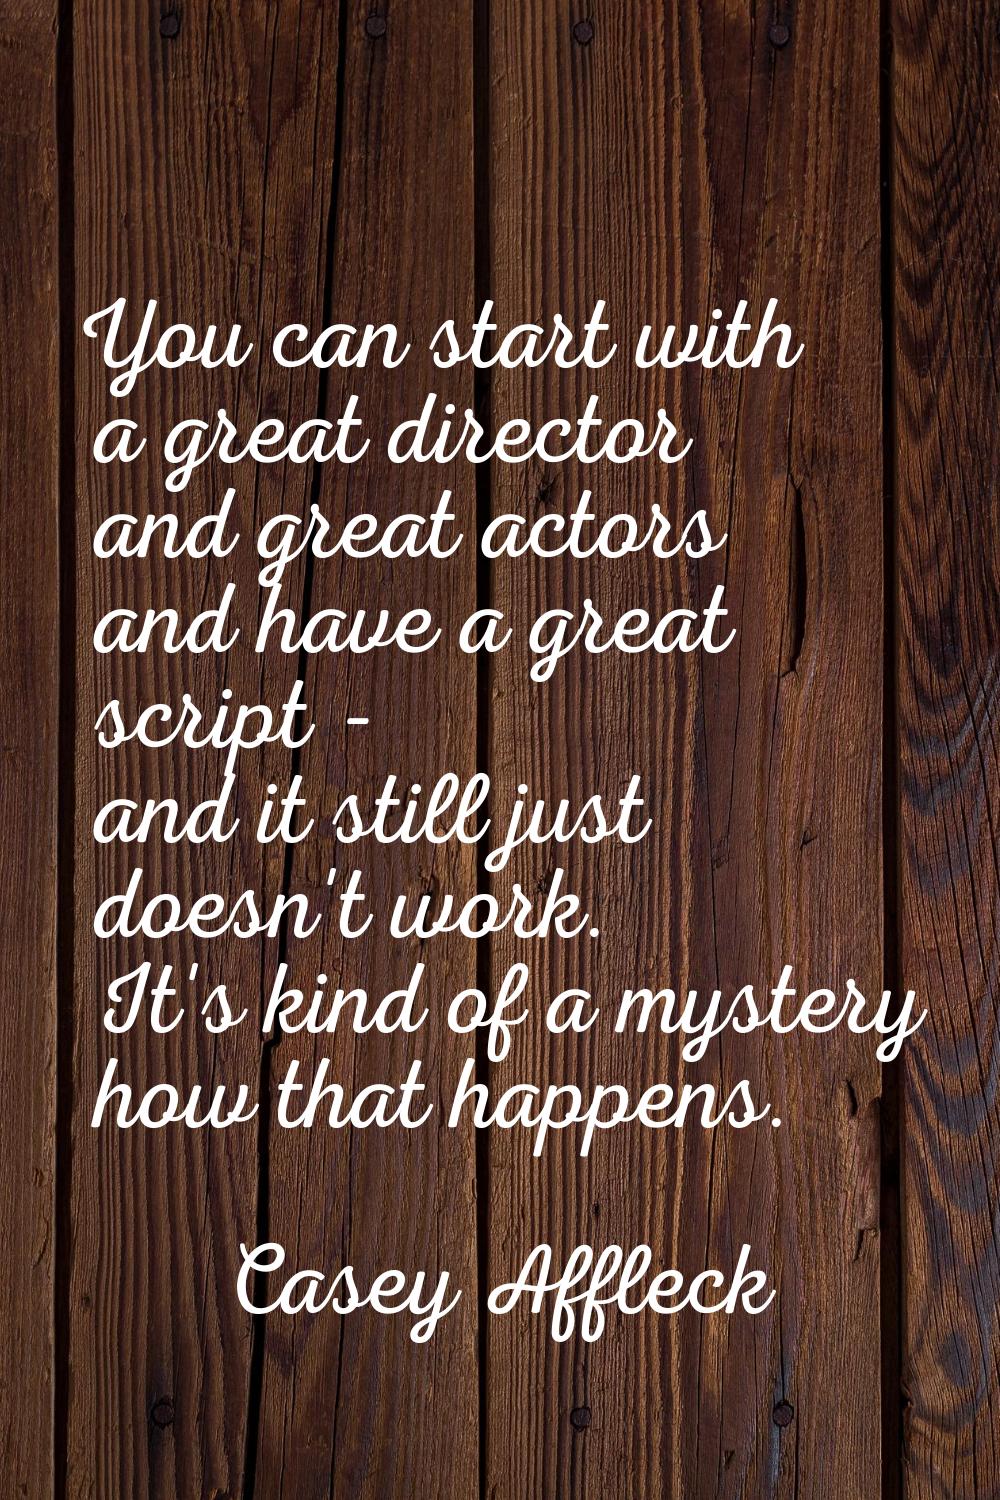 You can start with a great director and great actors and have a great script - and it still just do